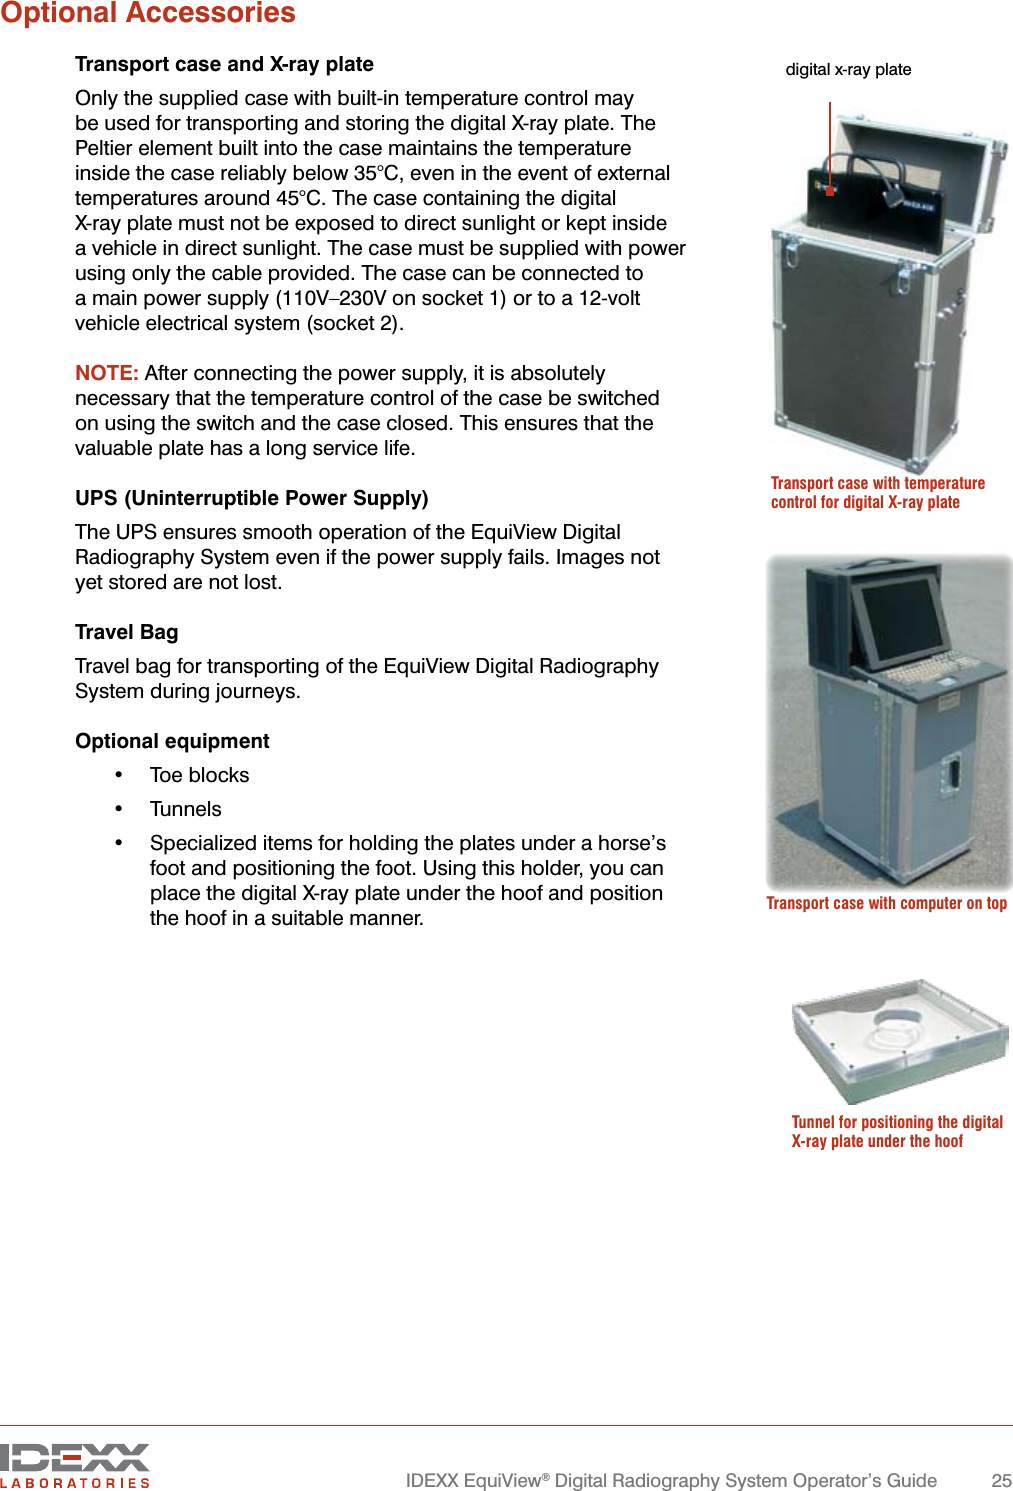   IDEXX EquiView® Digital Radiography System Operator’s Guide  25Optional AccessoriesTransport case and X-ray plateOnly the supplied case with built-in temperature control may be used for transporting and storing the digital X-ray plate. The Peltier element built into the case maintains the temperature inside the case reliably below 35°C, even in the event of external temperatures around 45°C. The case containing the digital  X-ray plate must not be exposed to direct sunlight or kept inside  a vehicle in direct sunlight. The case must be supplied with power using only the cable provided. The case can be connected to a main power supply (110V–230V on socket 1) or to a 12-volt vehicle electrical system (socket 2).NOTE: After connecting the power supply, it is absolutely necessary that the temperature control of the case be switched on using the switch and the case closed. This ensures that the valuable plate has a long service life.UPS (Uninterruptible Power Supply)The UPS ensures smooth operation of the EquiView Digital Radiography System even if the power supply fails. Images not yet stored are not lost.Travel BagTravel bag for transporting of the EquiView Digital Radiography System during journeys.Optional equipment•  Toe blocks•  Tunnels•  Specialized items for holding the plates under a horse’s foot and positioning the foot. Using this holder, you can place the digital X-ray plate under the hoof and position the hoof in a suitable manner. Transport case with temperature control for digital X-ray platedigital x-ray plate Transport case with computer on topTunnel for positioning the digital X-ray plate under the hoof